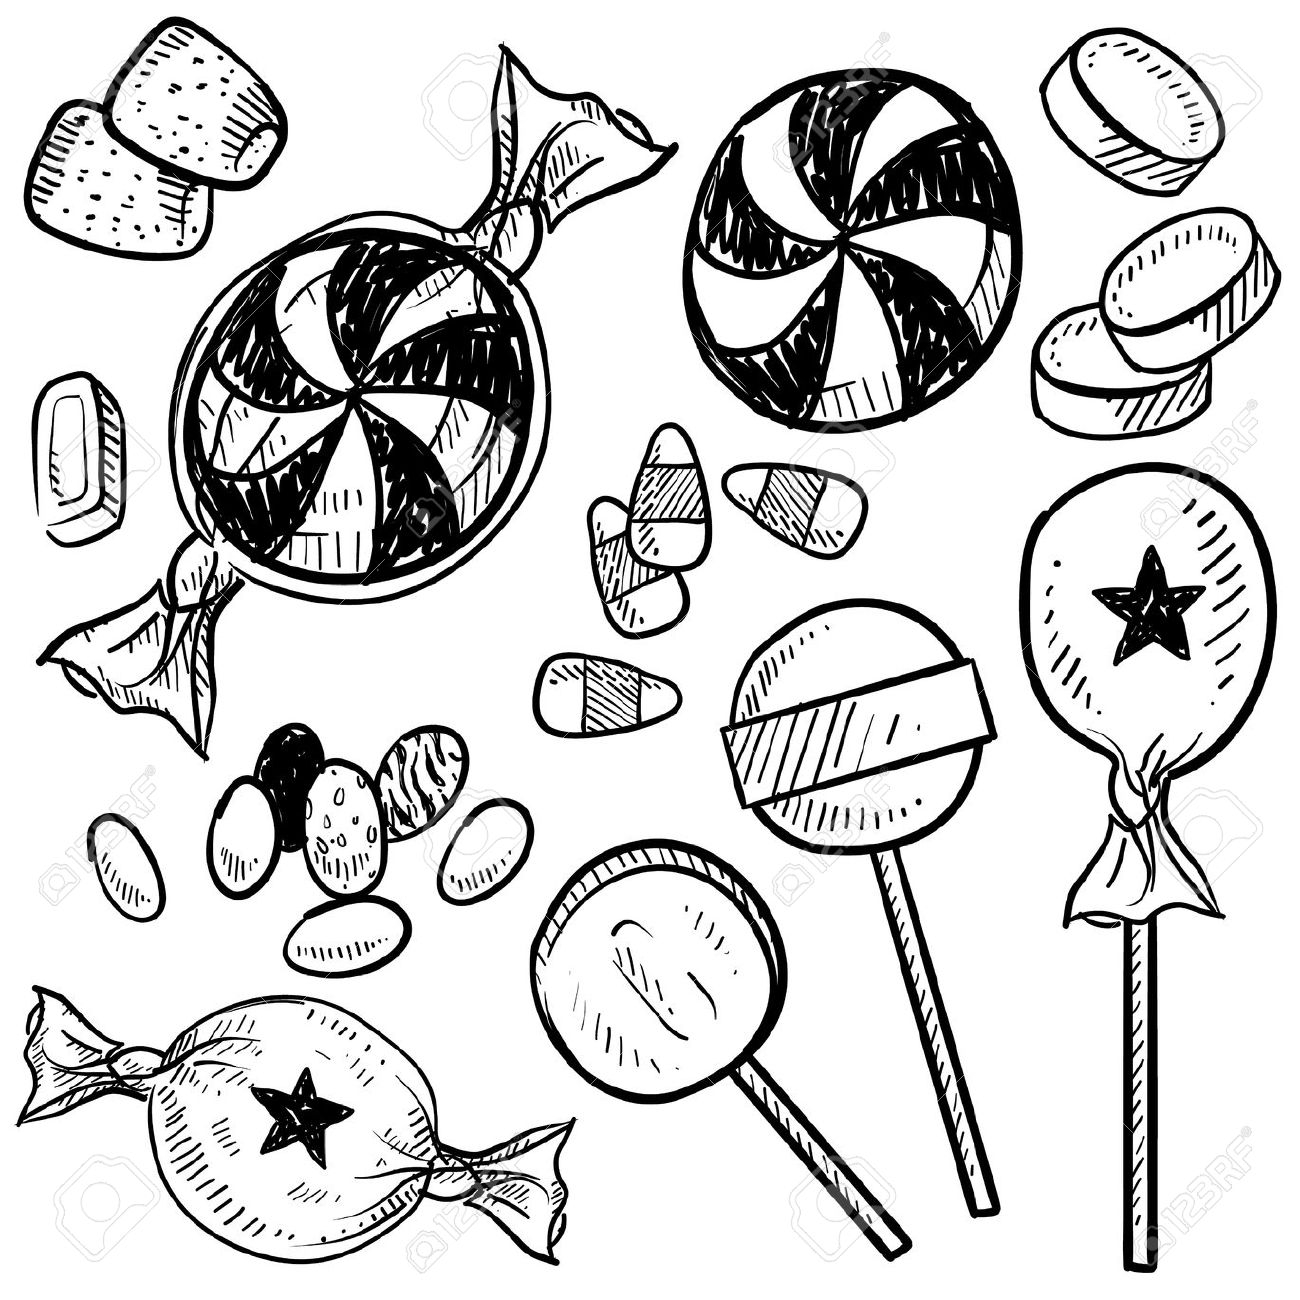 candy clipart logo